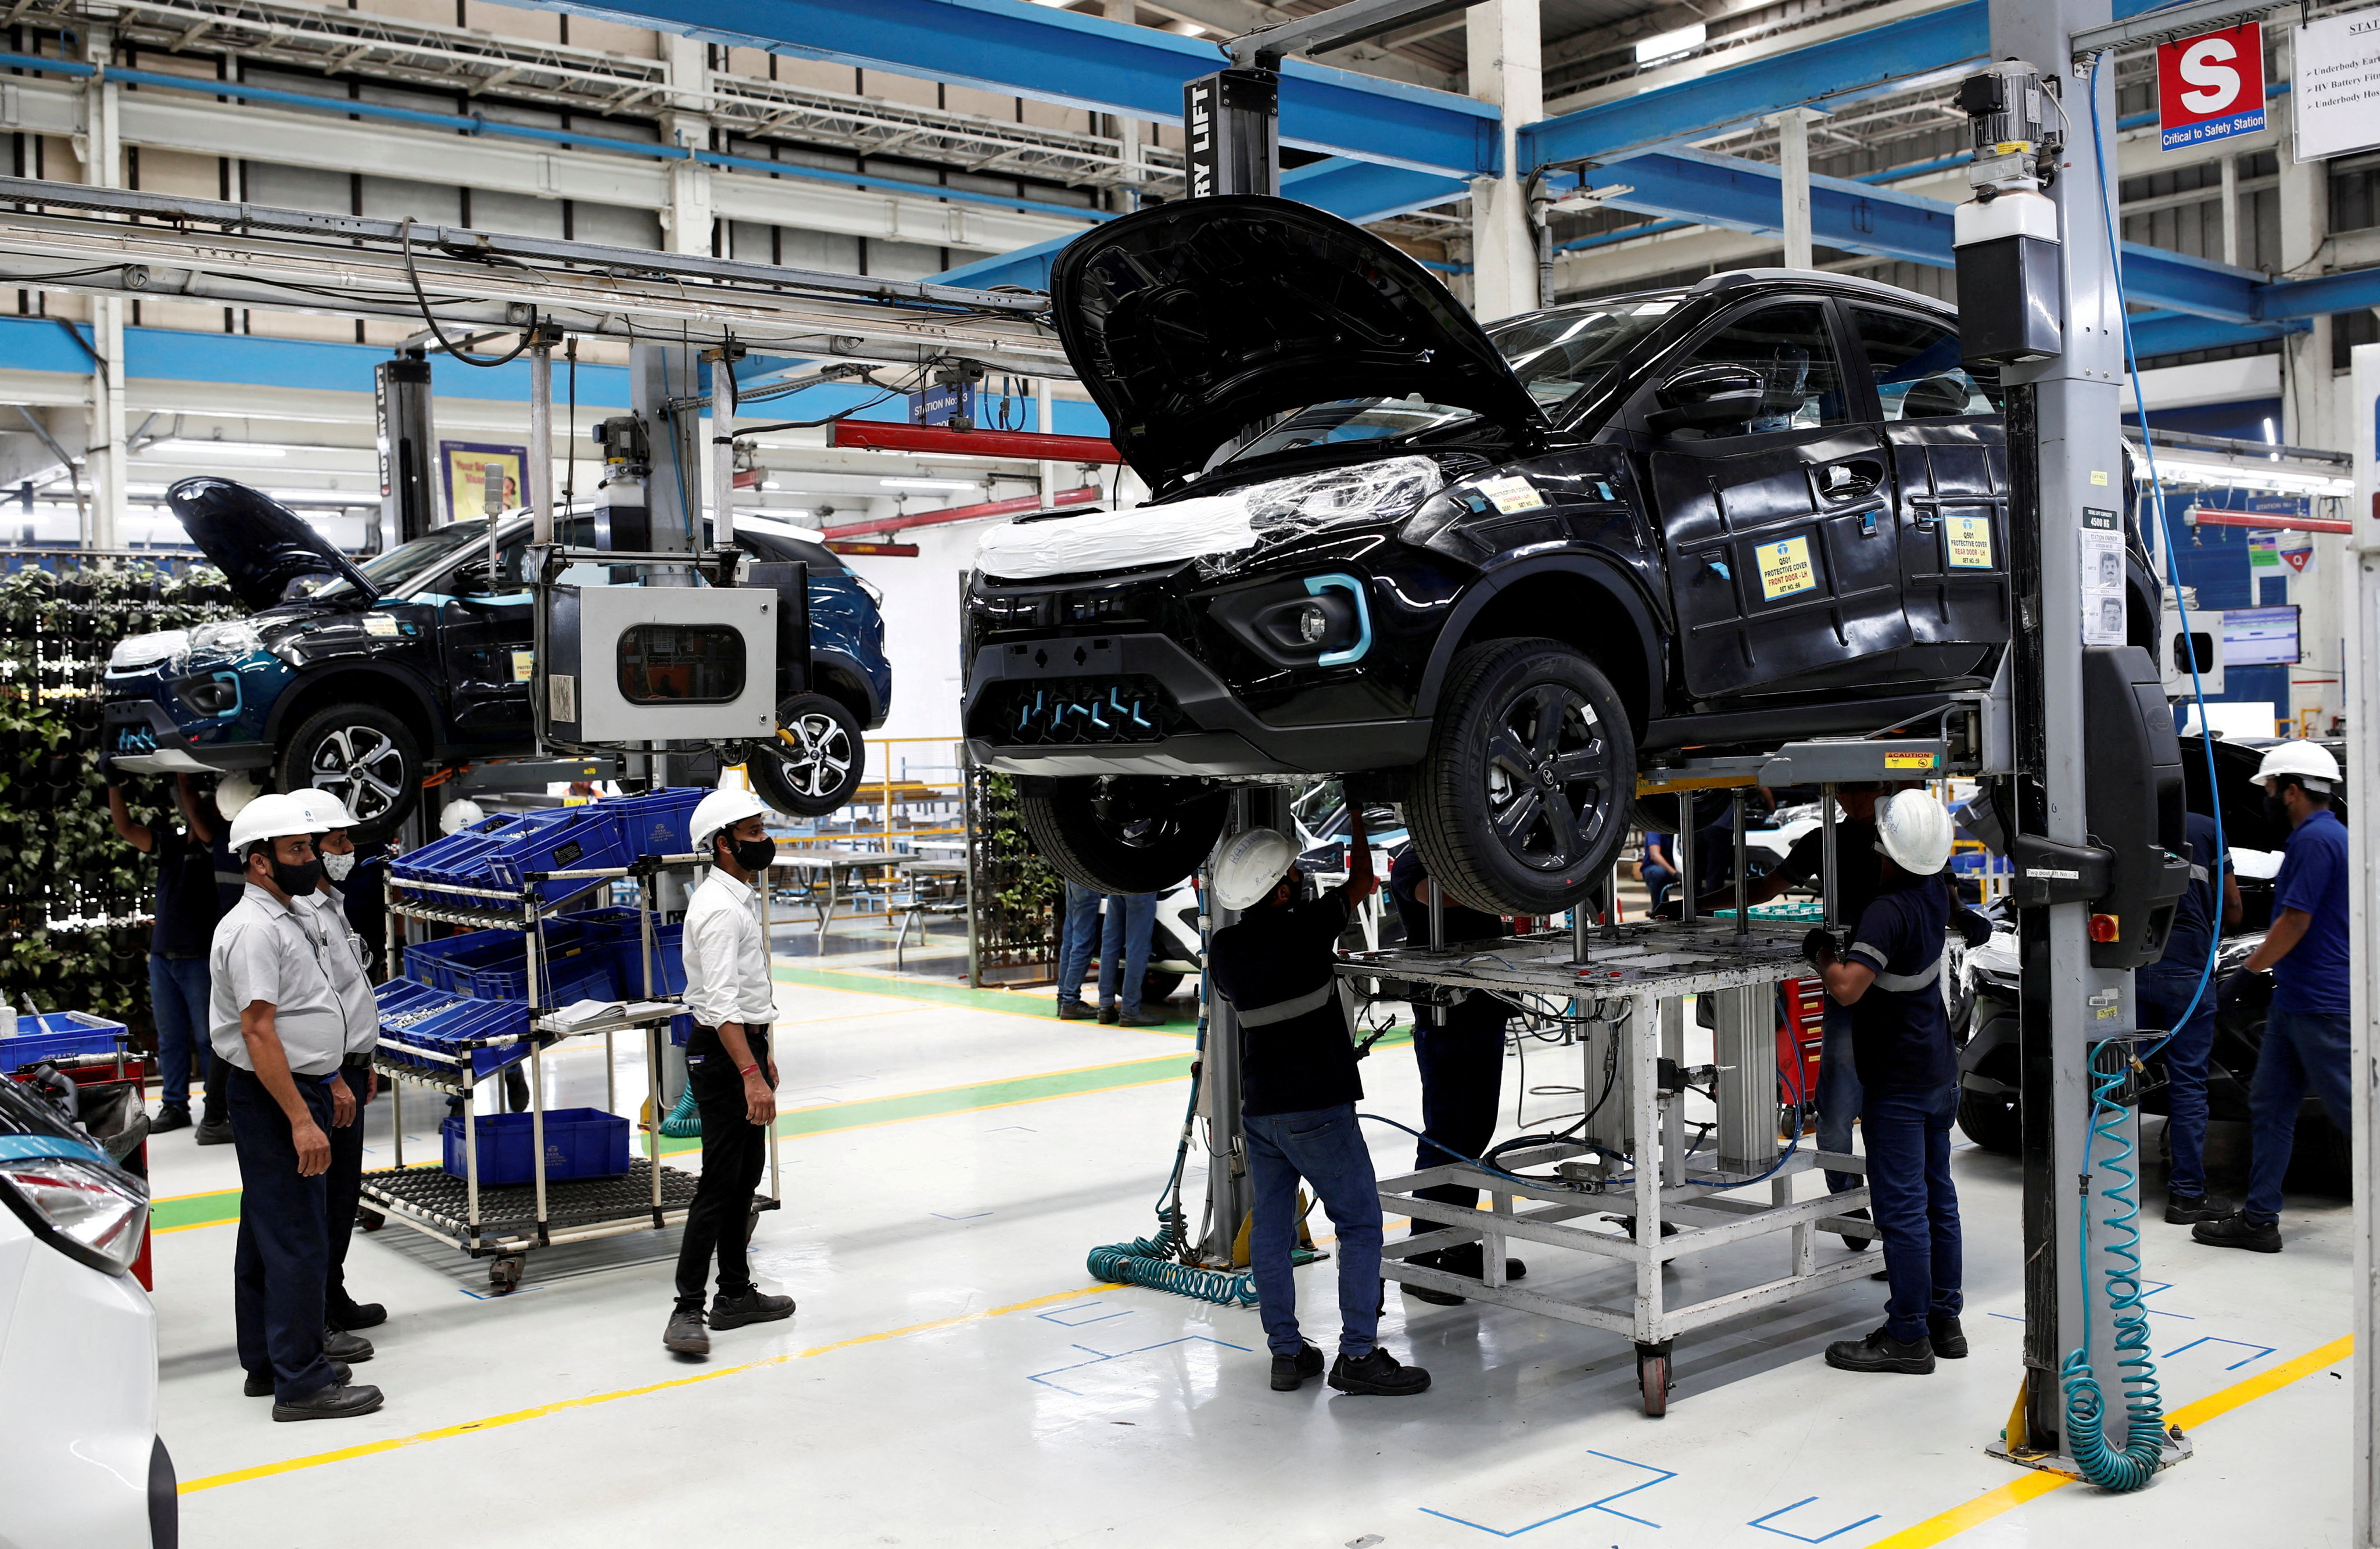 Workers inspect Tata Nexon electric sport utility vehicles at a Tata Motors plant in Pune, India, on April 7, 2022. The electric vehicle market in India is growing rapidly and cost-conscious consumers will be looking to new entrants to rev things up. Photo: Reuters